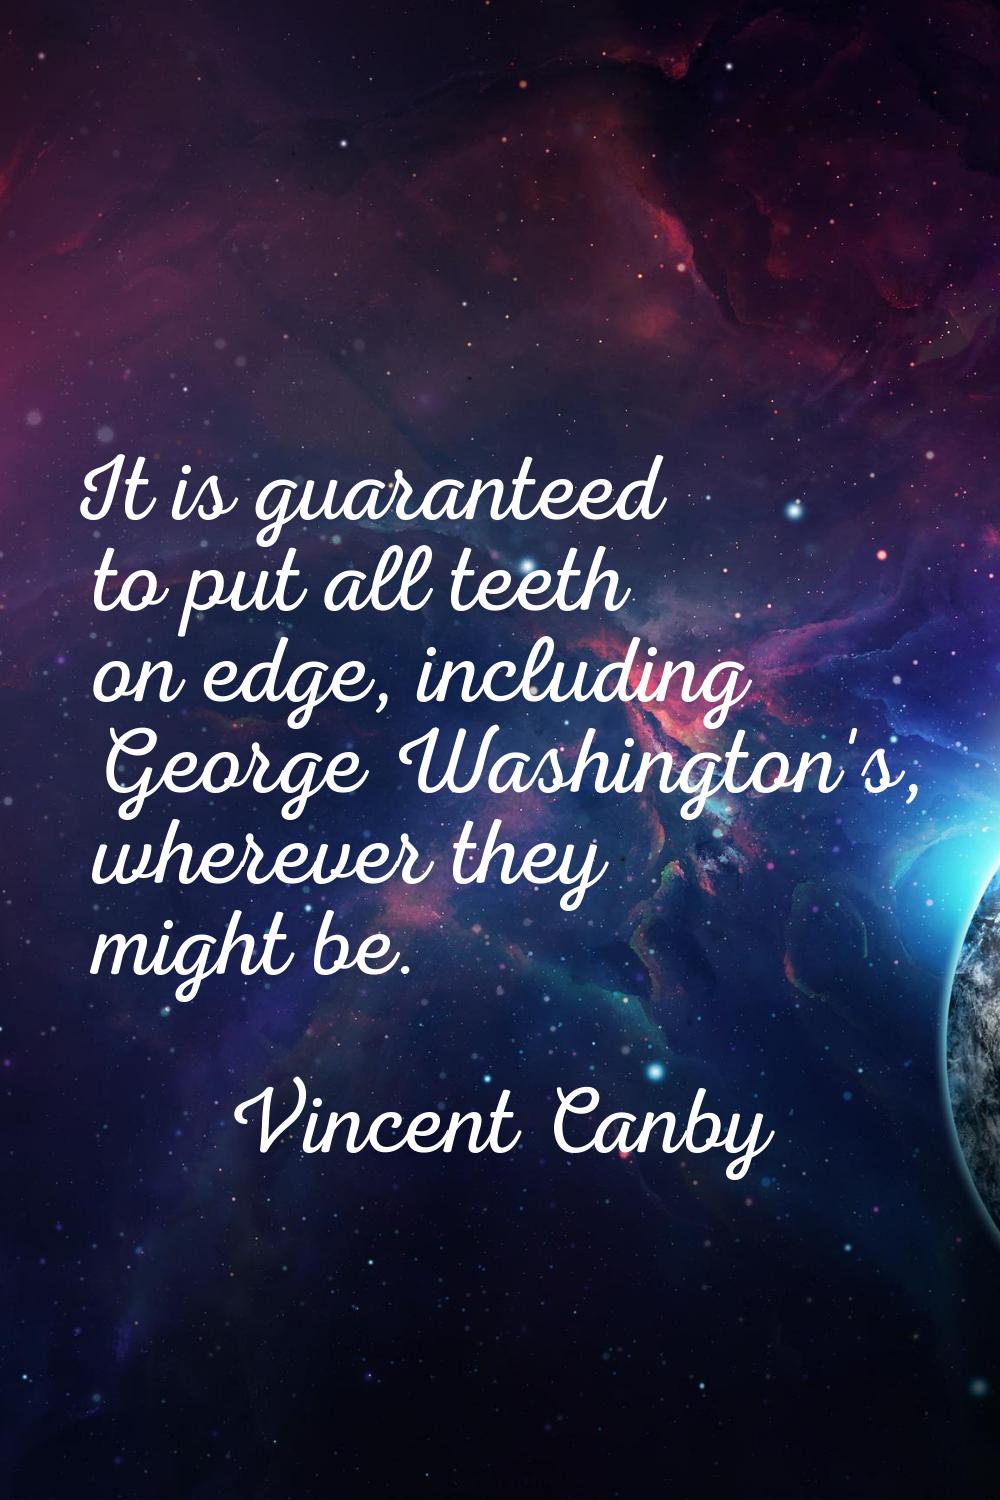 It is guaranteed to put all teeth on edge, including George Washington's, wherever they might be.